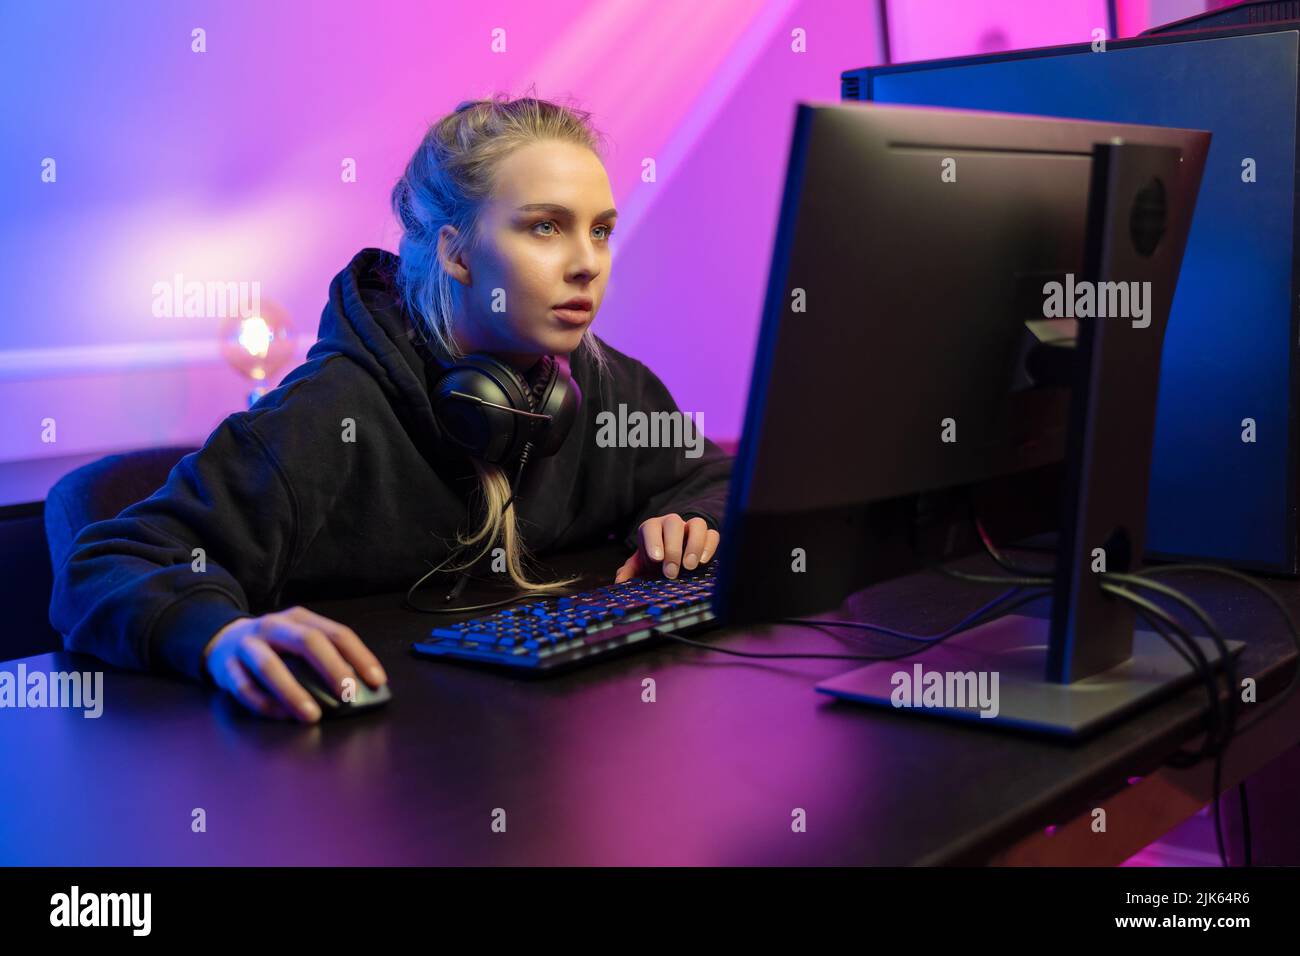 Focused Professional E-sport Gamer Girl in Hoody Playing Online Video Game on PC Stock Photo